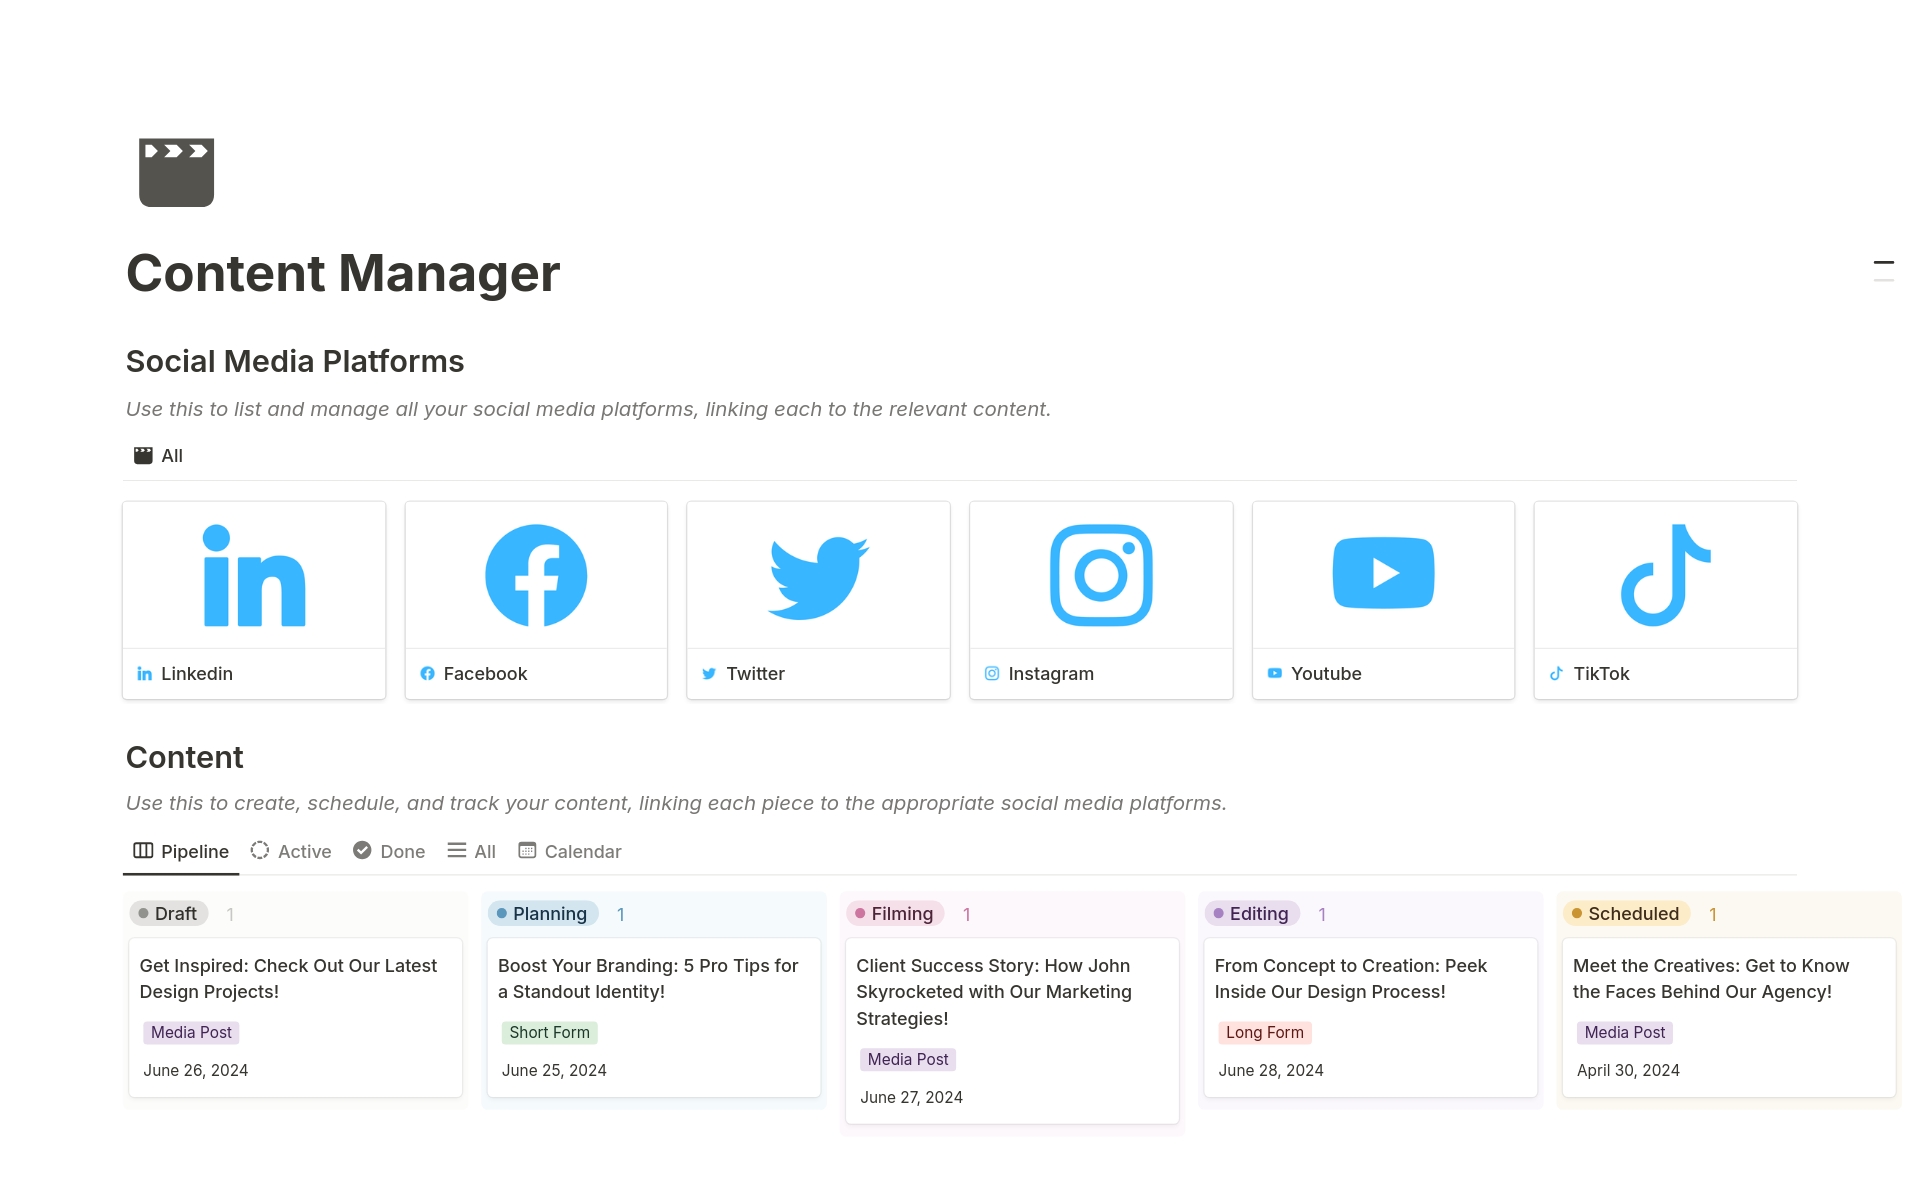 Organize and manage your social media presence effortlessly. The Social Media Platforms Database helps you handle all your channels, while the Content Database allows easy planning, creation, scheduling, and tracking of your content.